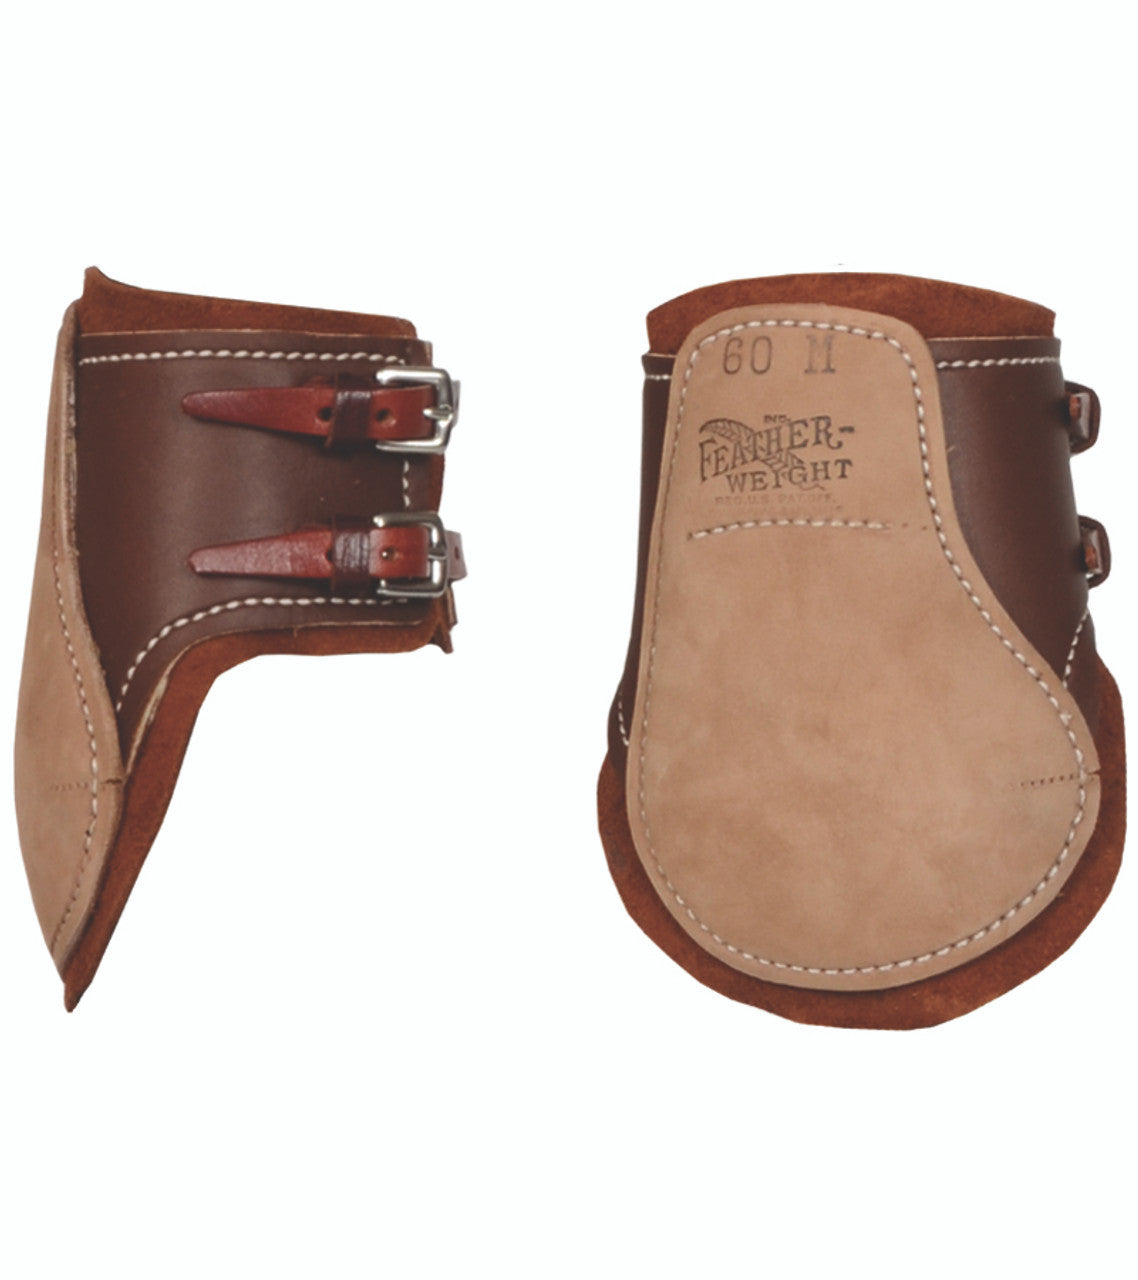 Feather-Weight Hind Leg Ankle Boots-TexanSaddles.com